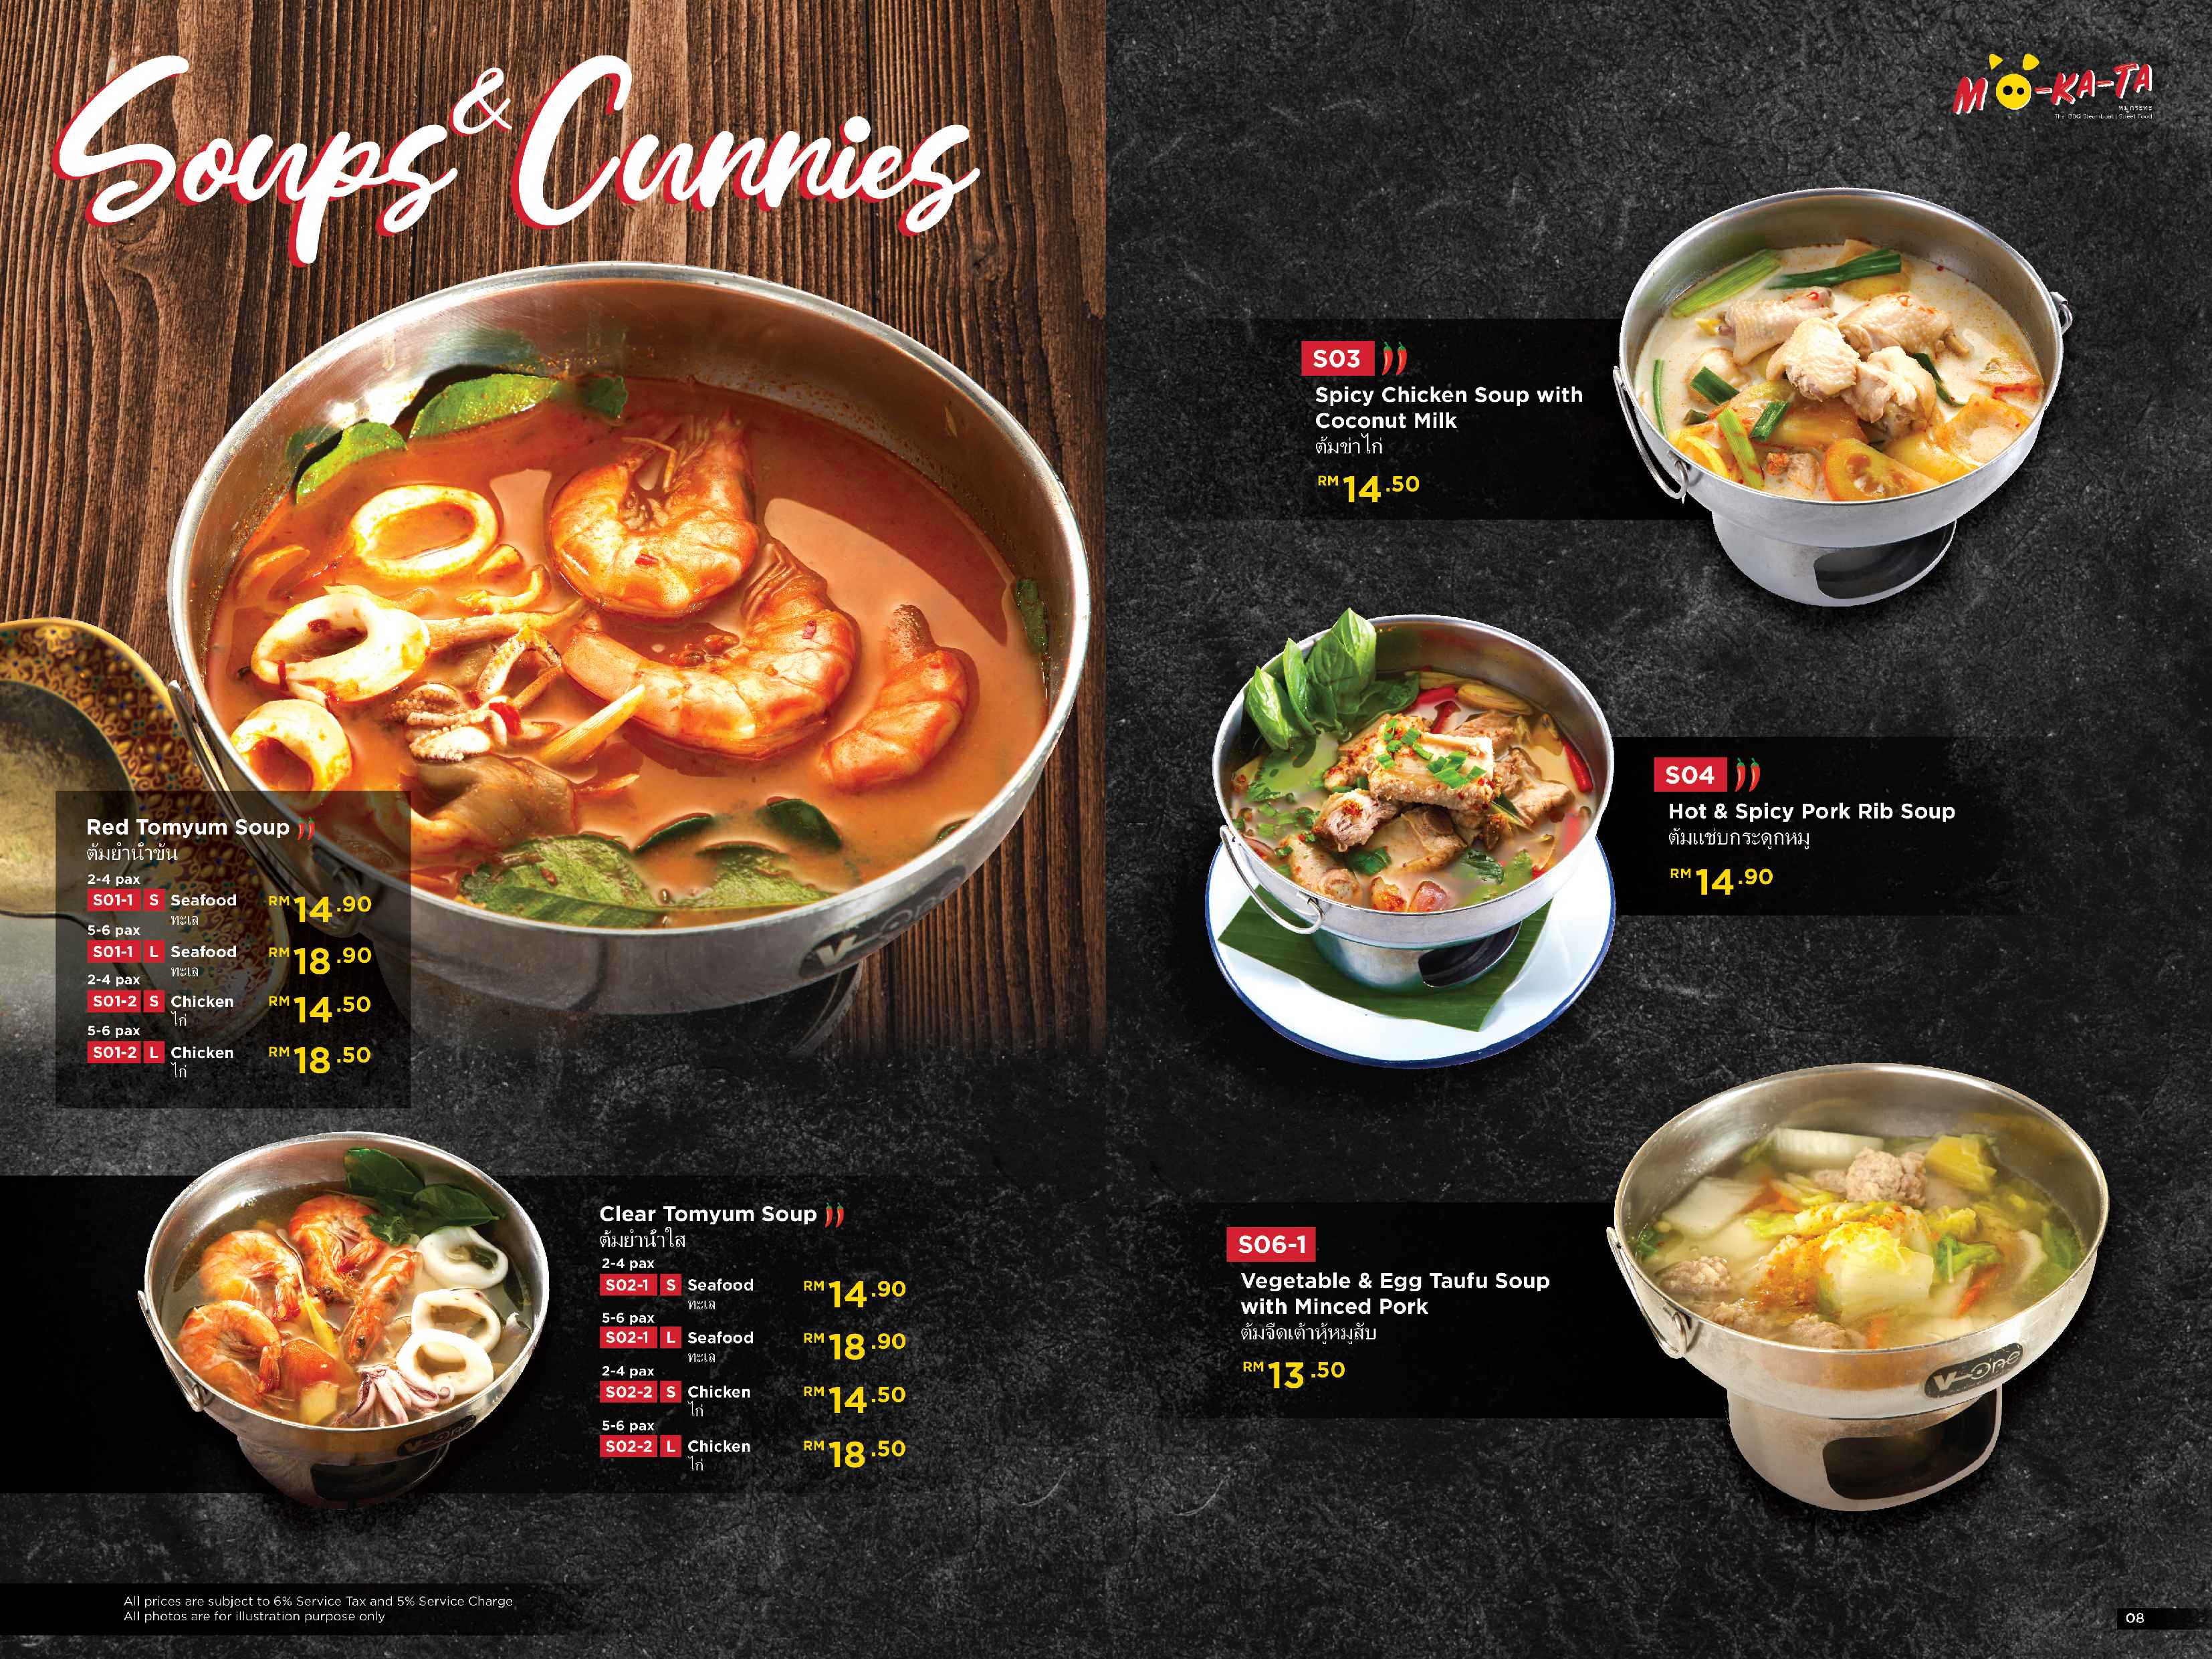 Soups & Curries